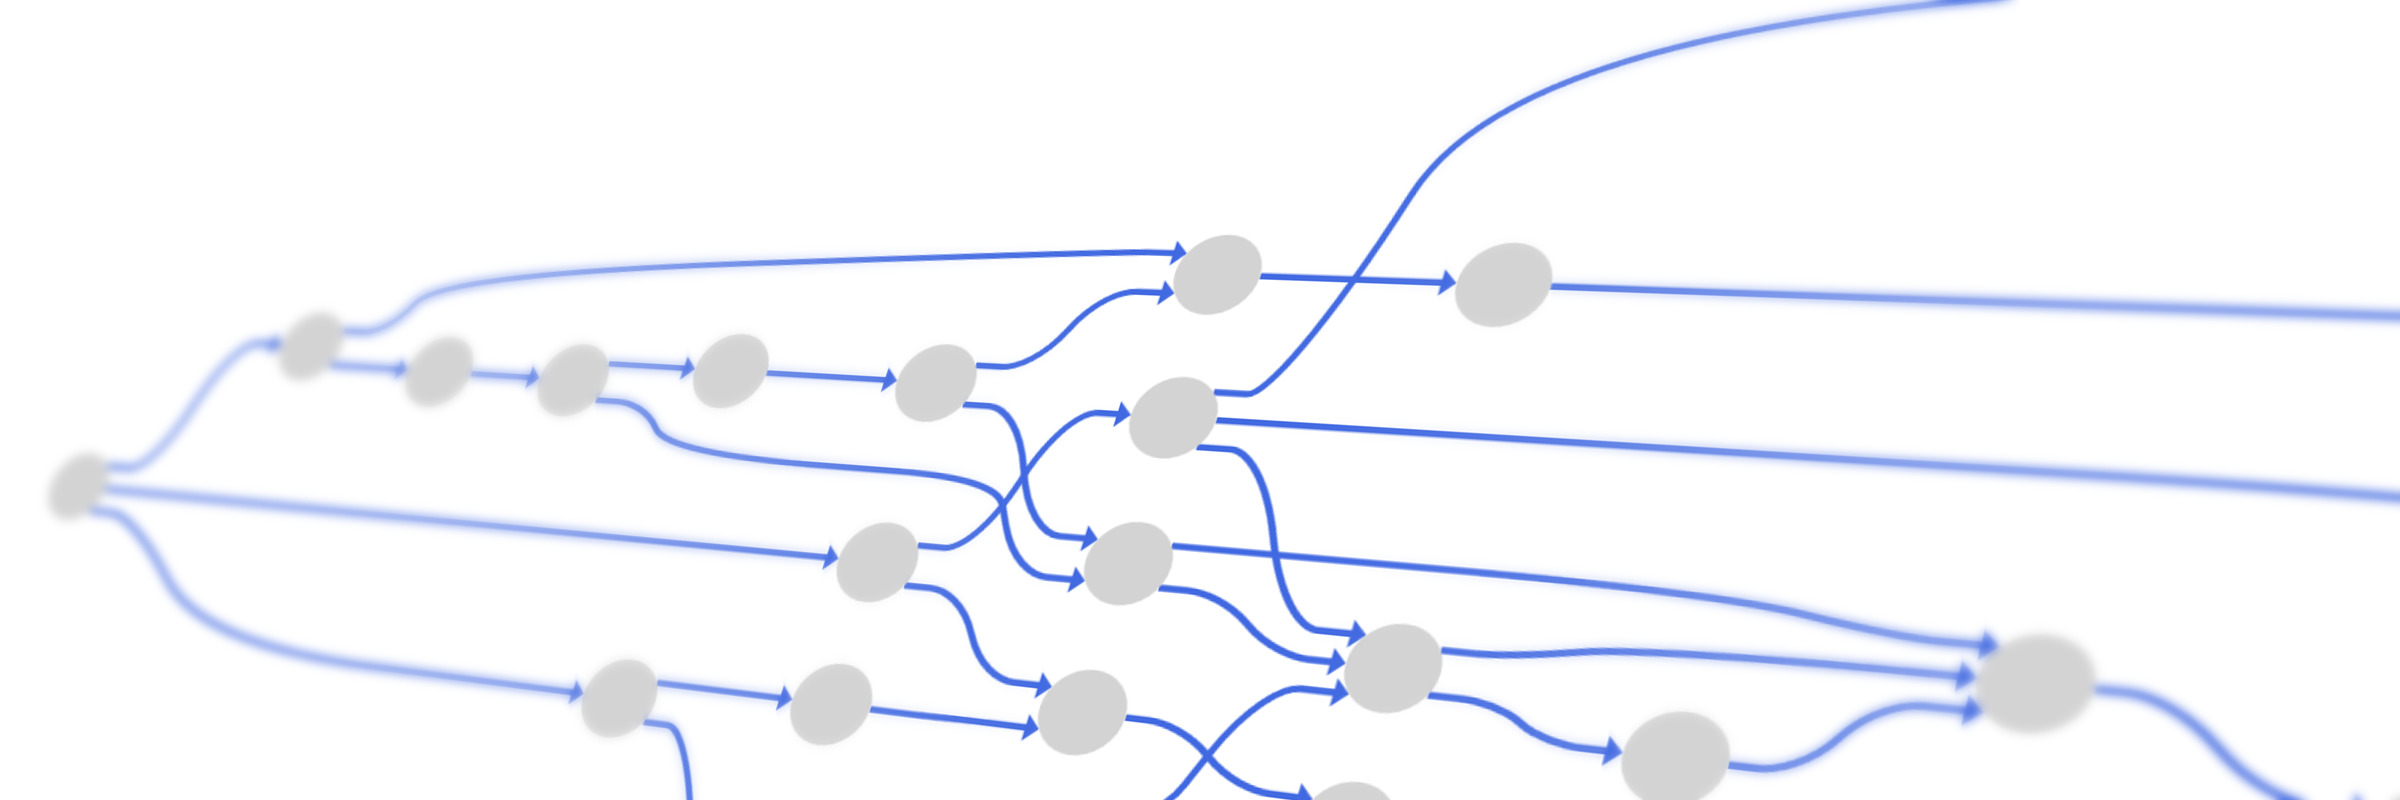 Hero image for Drawing Smooth Curved Links in Diagrams and Networks